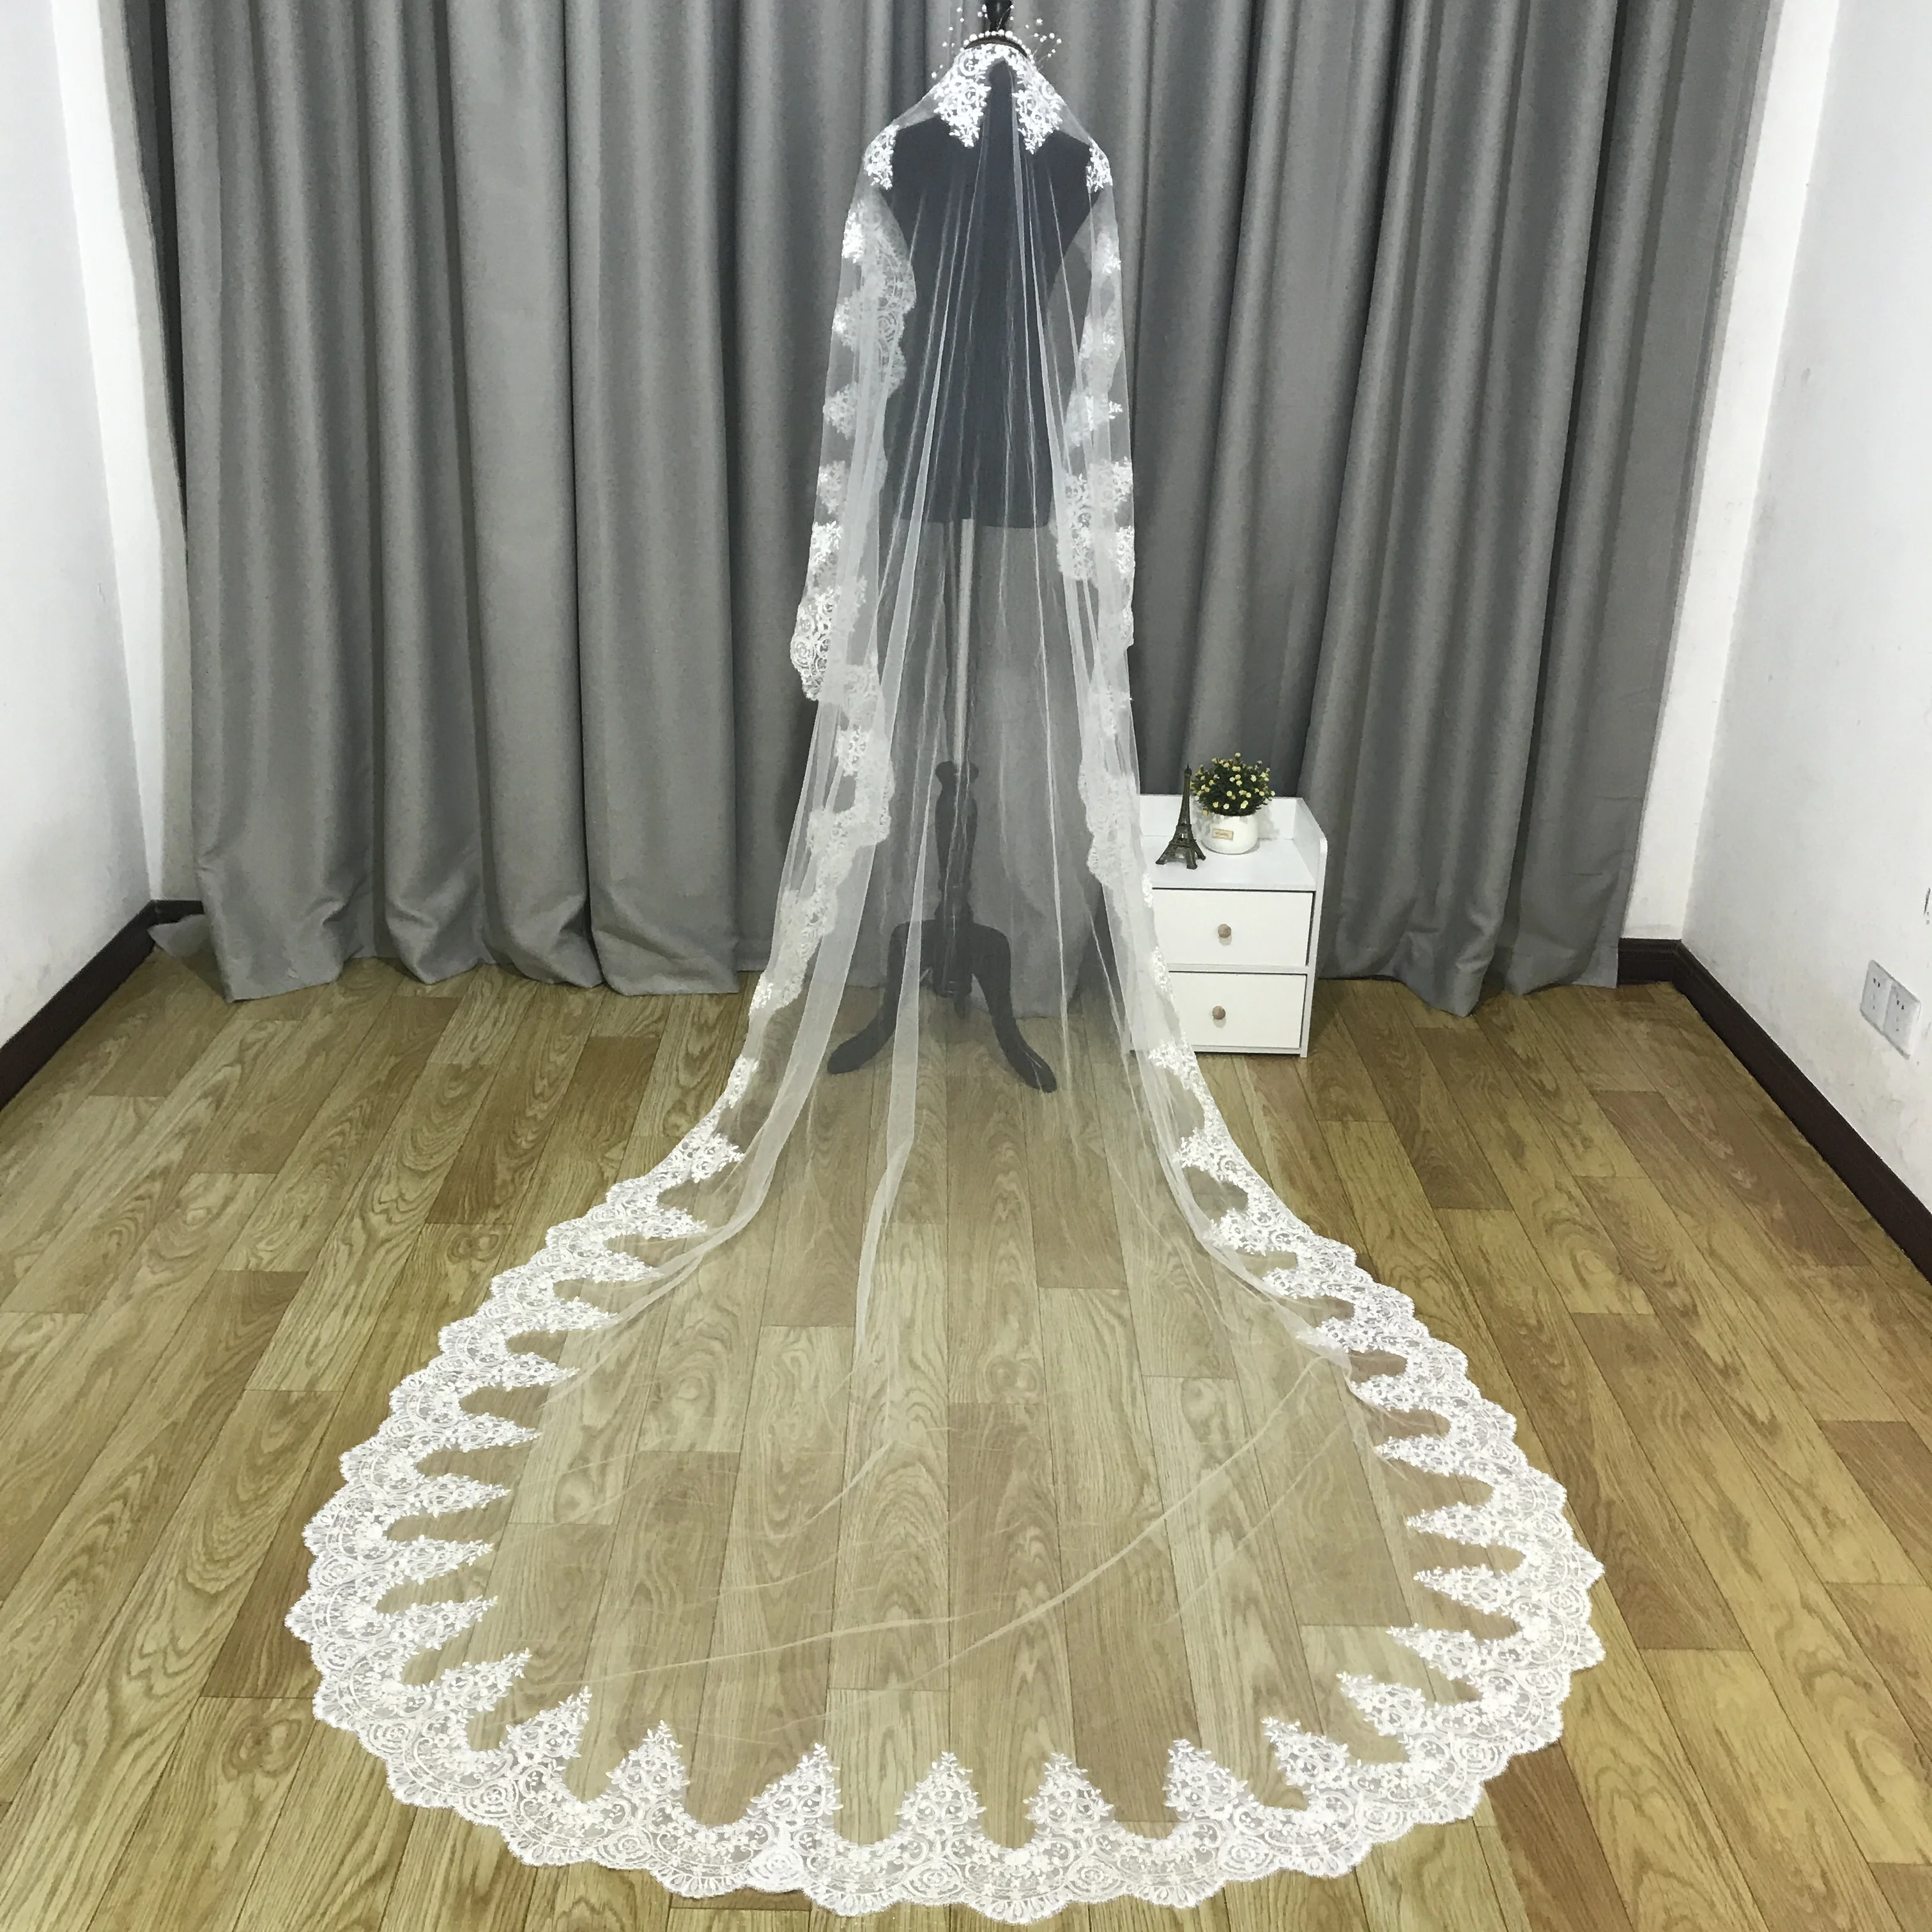 Hot sale 3M Long Wedding Veil Full Decal  Applique Edge One Layer Cathedral Veils Two Uses With Comb Tulle Bridal Veil No Sequin